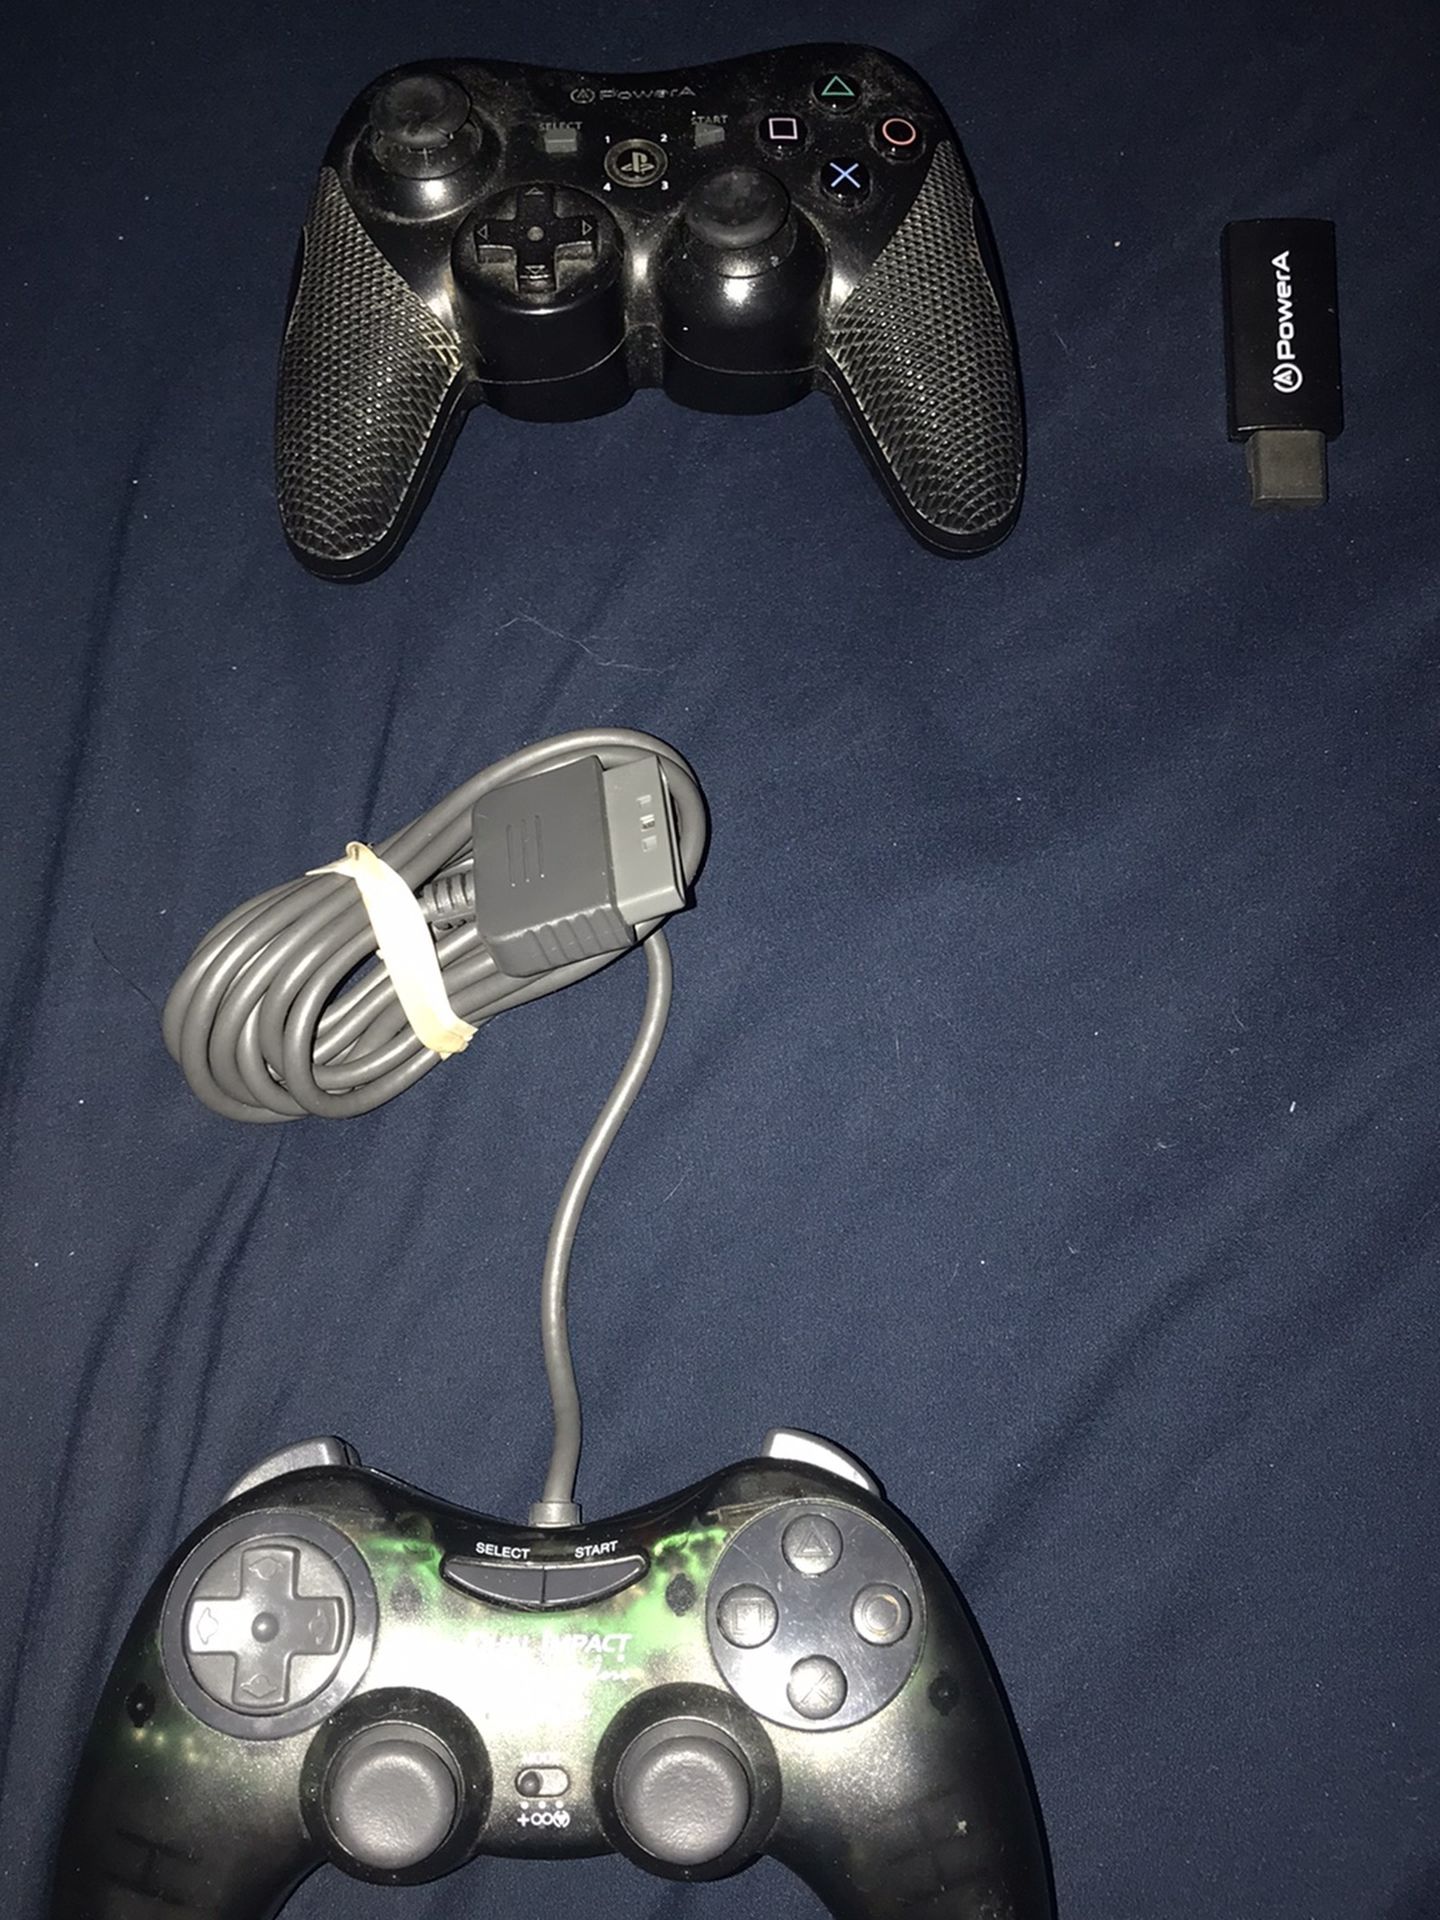 Ps2 Controllers